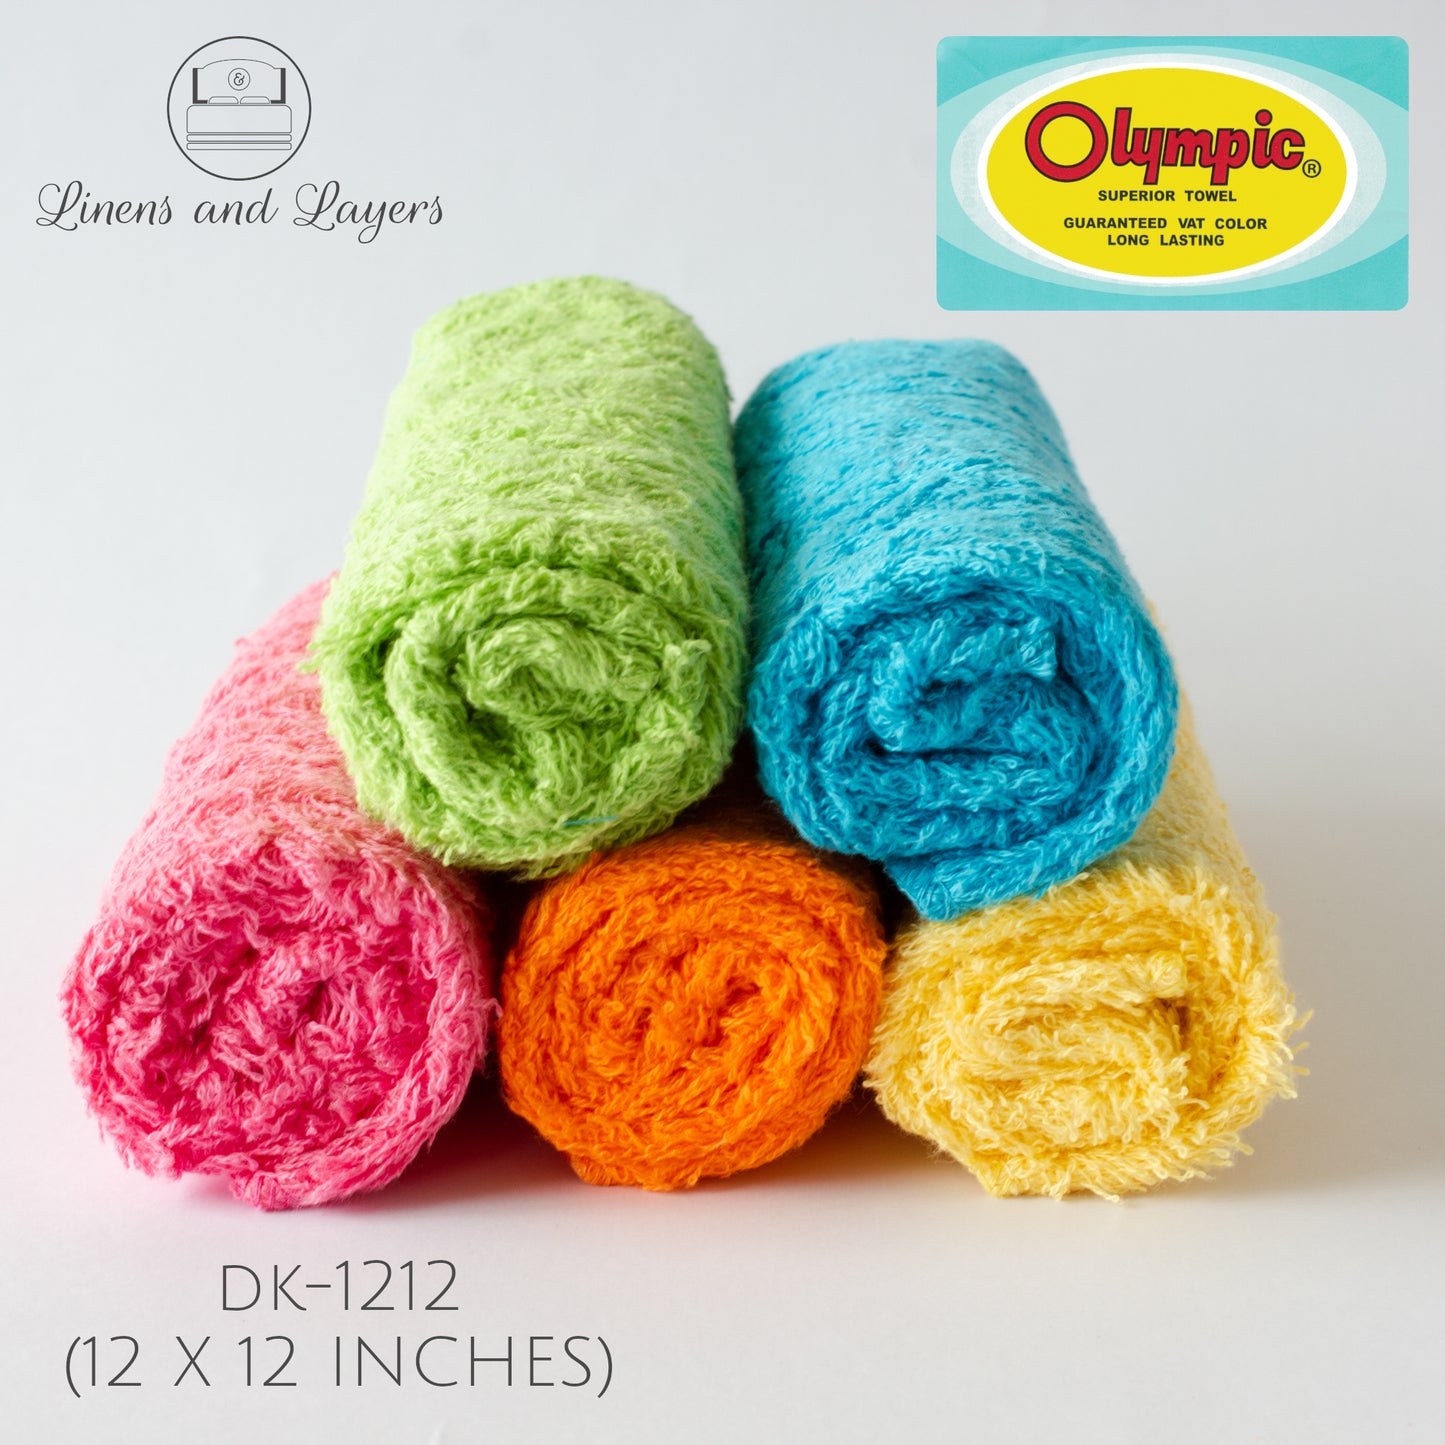 Olympic Face Towel (430 GSM) - DK-1212 Terrycloth - 12x12 inches